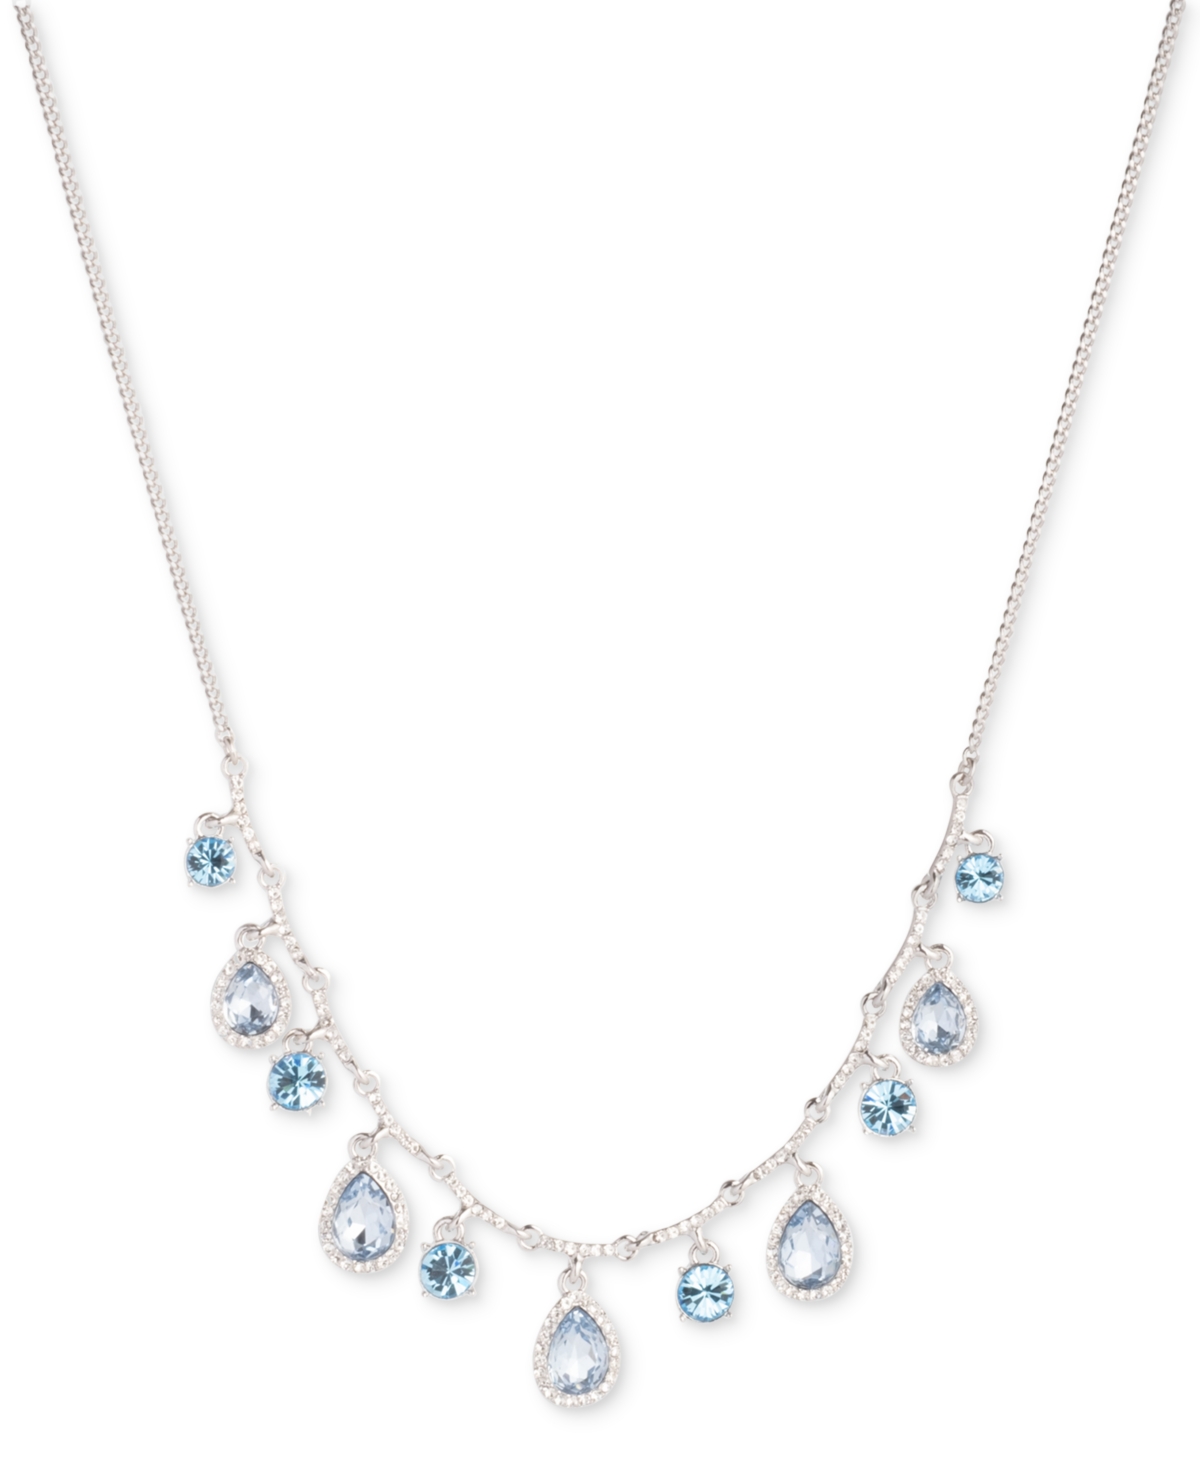 Silver-Tone Crystal Frontal Necklace, 16" + 3" extender - Navy